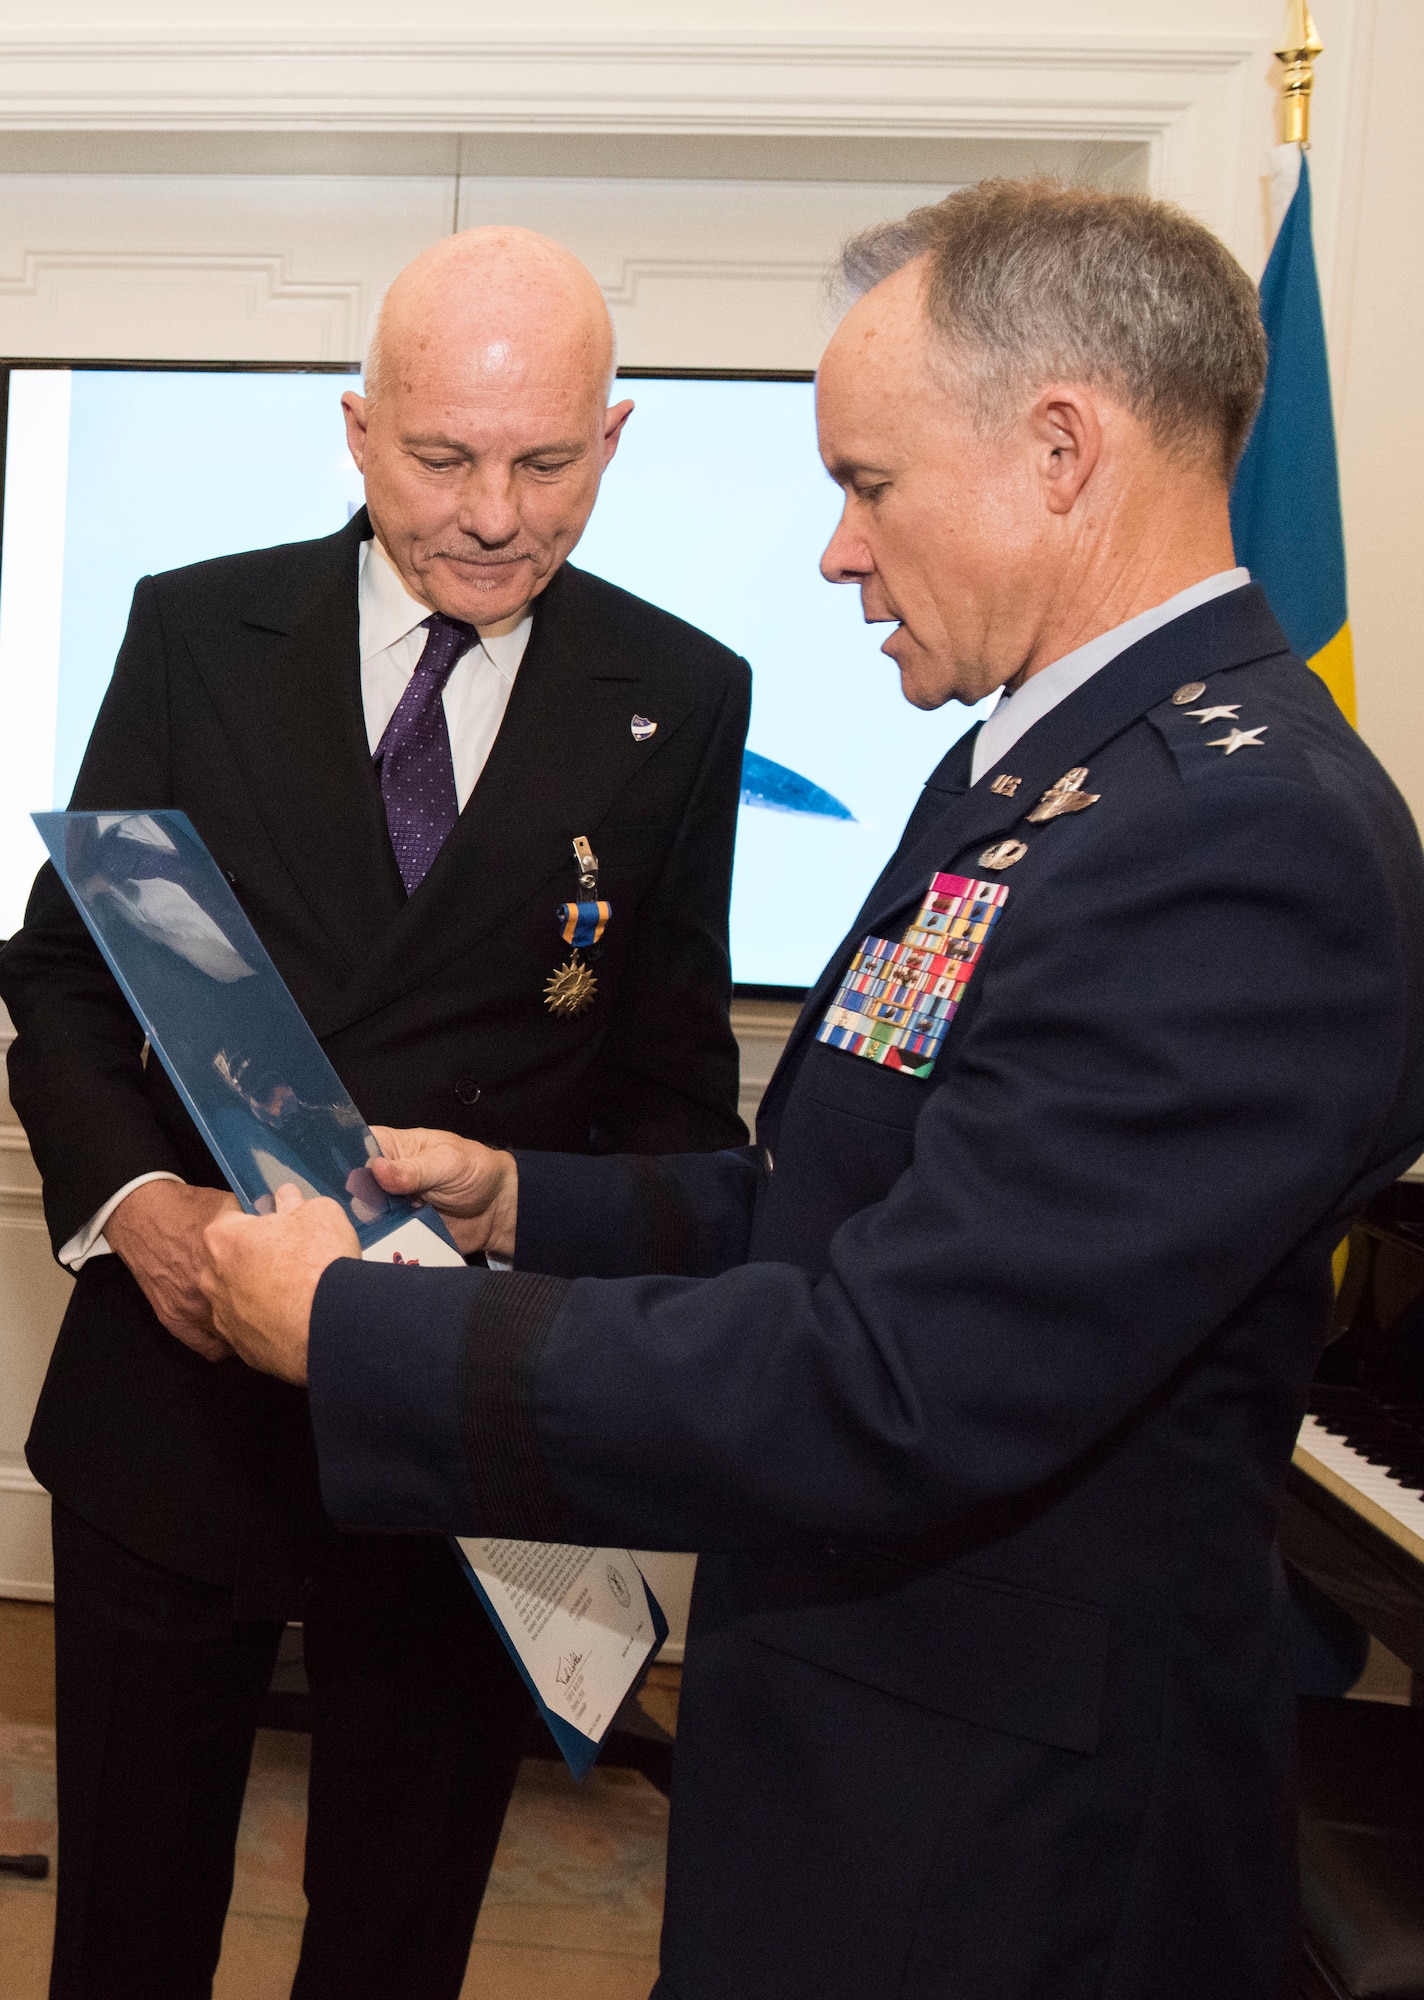 U.S. Air Force Maj. Gen. John Williams, Mobilization Assistant to the commander, U.S. Air Forces in Europe and Africa, presents the U.S. Air Medal to Swedish air force Maj. Krister Sjoberg in Stockholm, Sweden, Nov. 28, 2018. The Swedish pilots were awarded the U.S. Air Medal for their actions on June 29, 1987. (U.S. Air Force Photo by Senior Airman Kelly O'Connor)